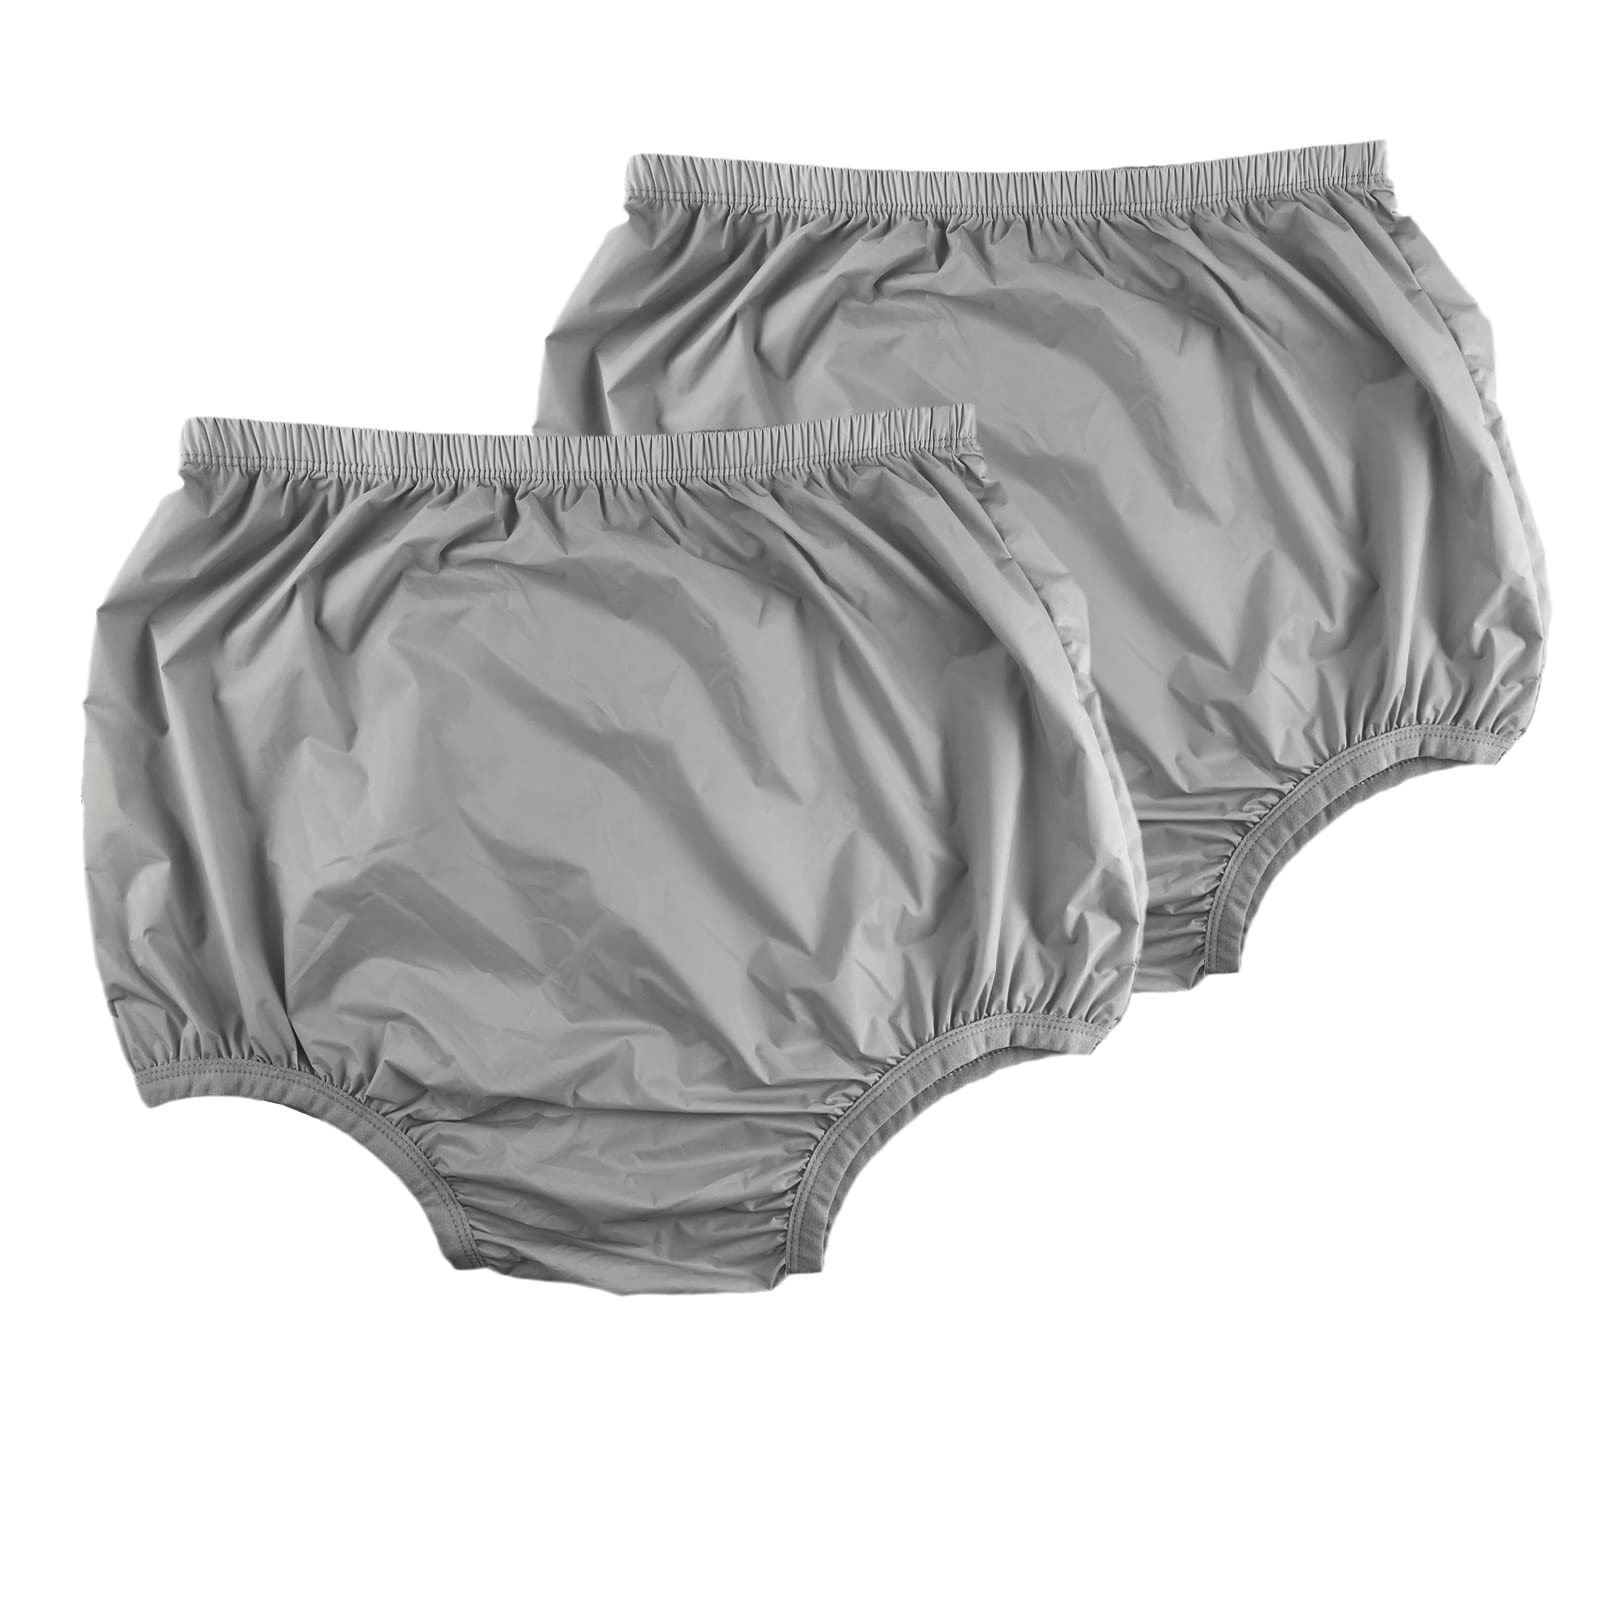 Spartan Waterproof Protective Pant Adult Diaper Cover 